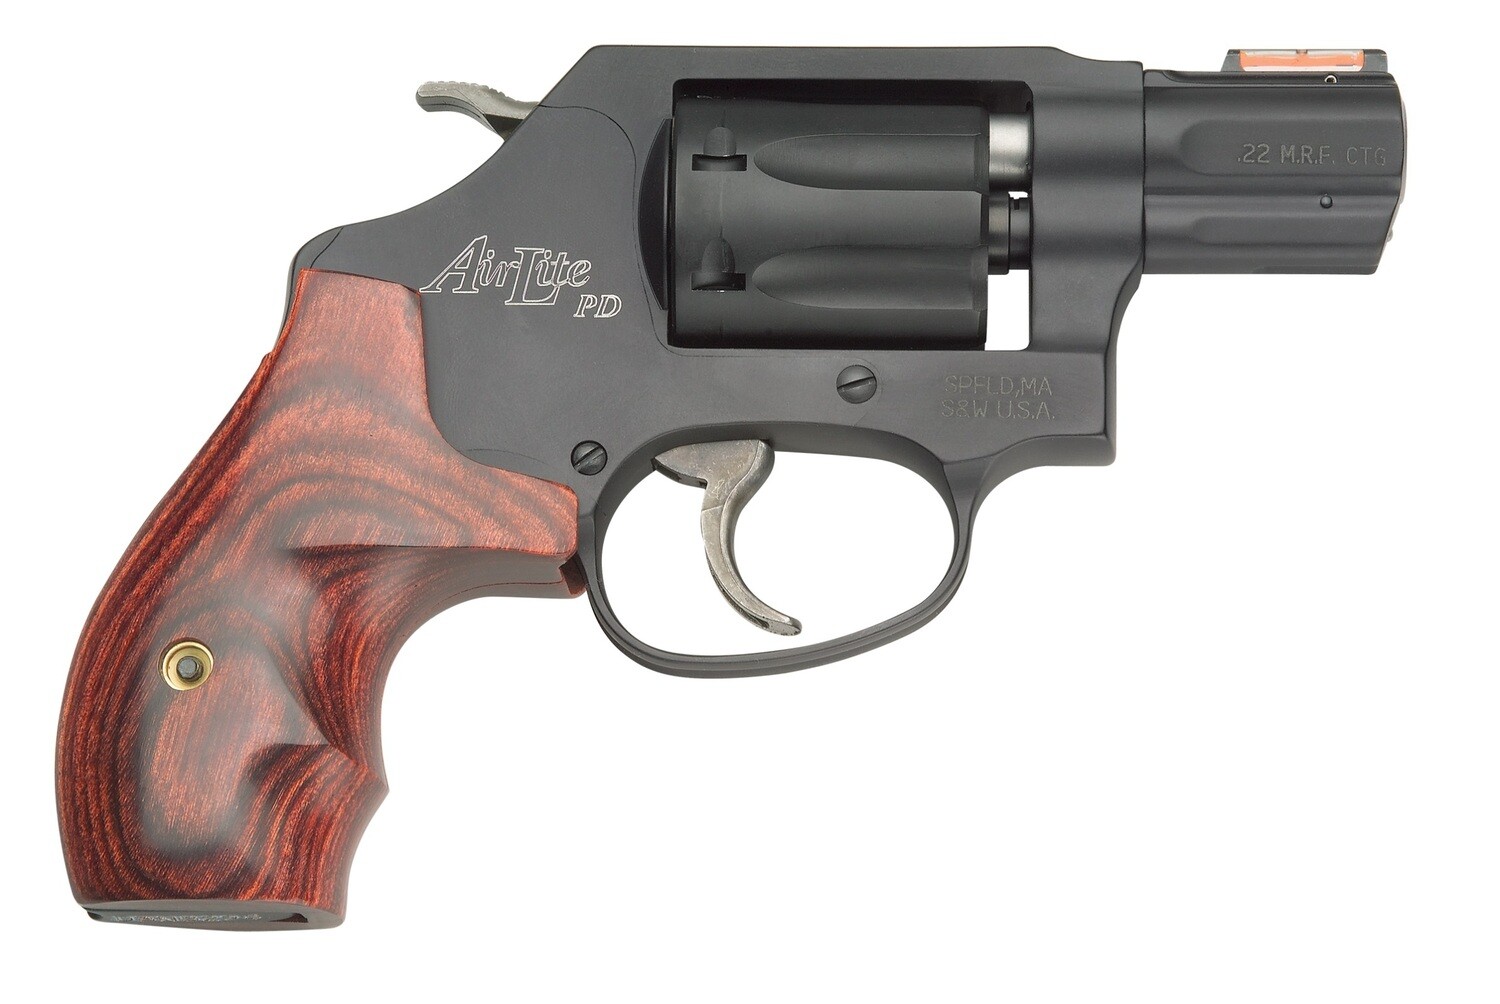 Smith and Wesson 351pd 22mag 1-7/8" 7rd Hi-viz